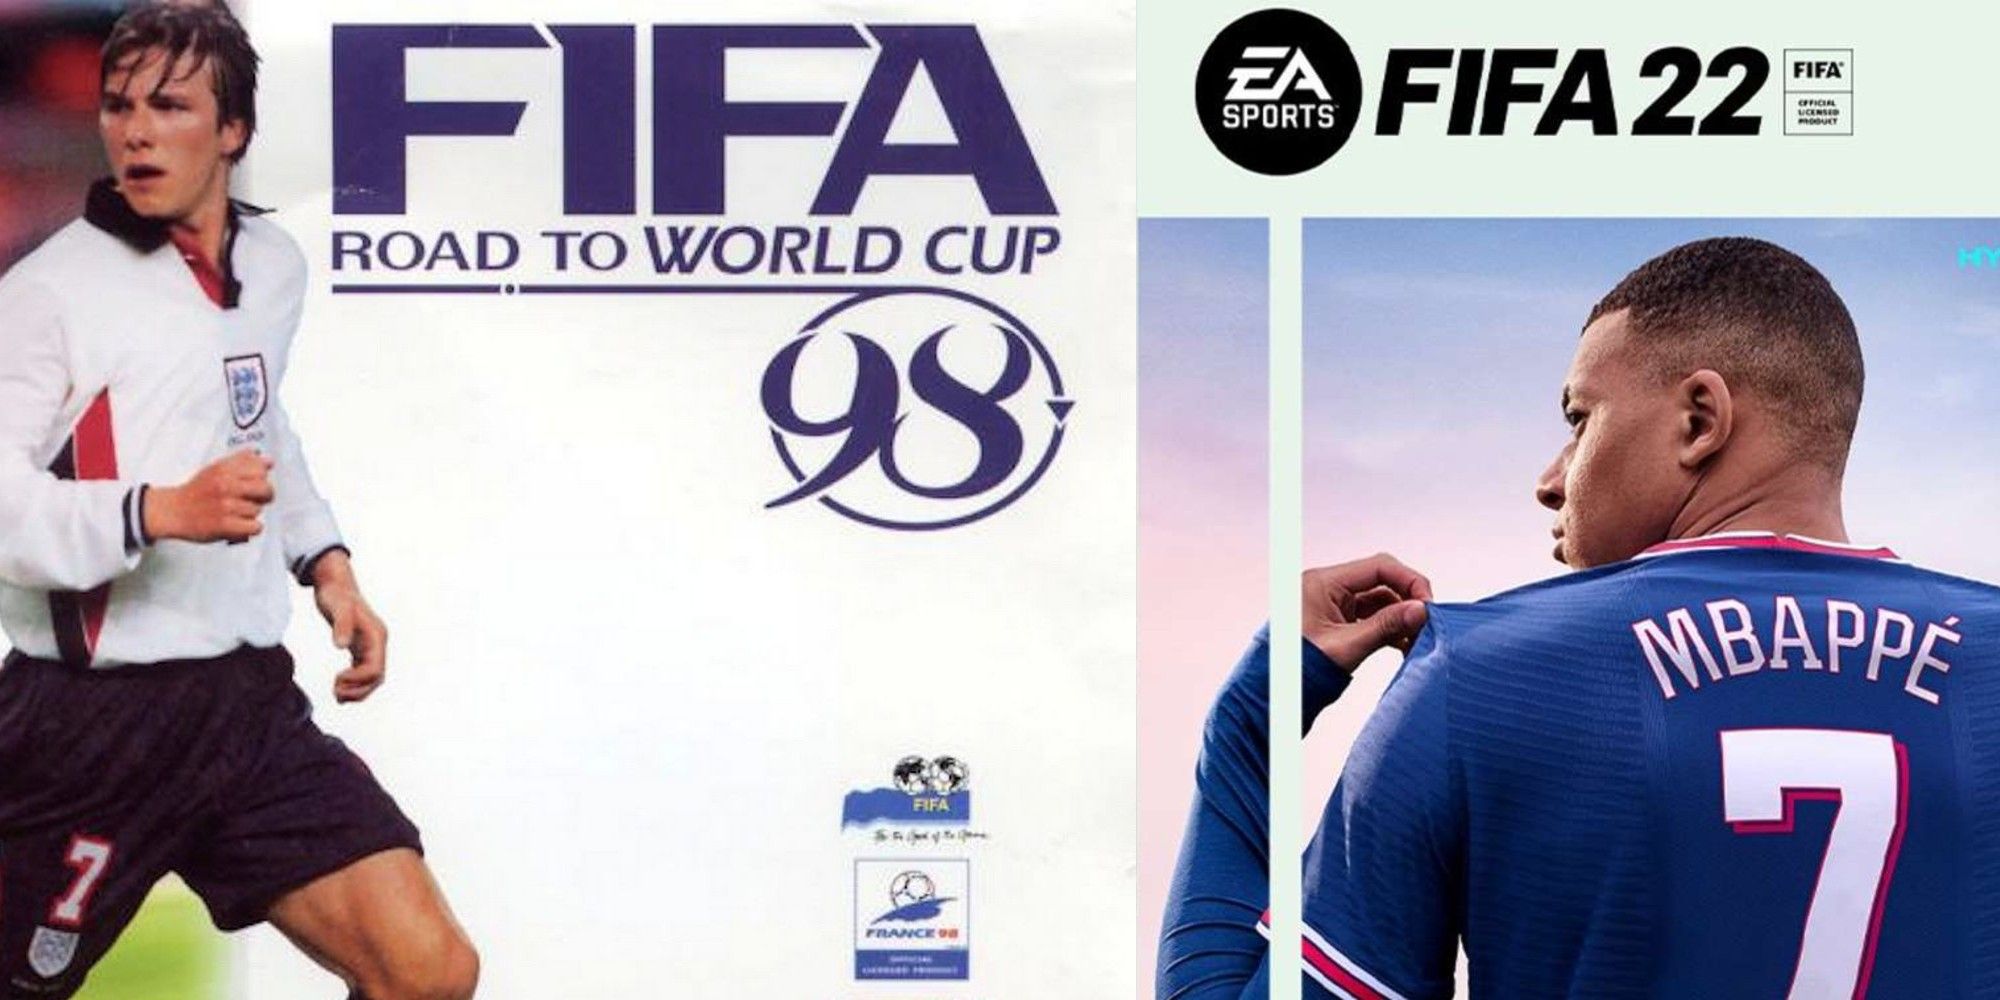 FIFA GAMES 98 AND 22